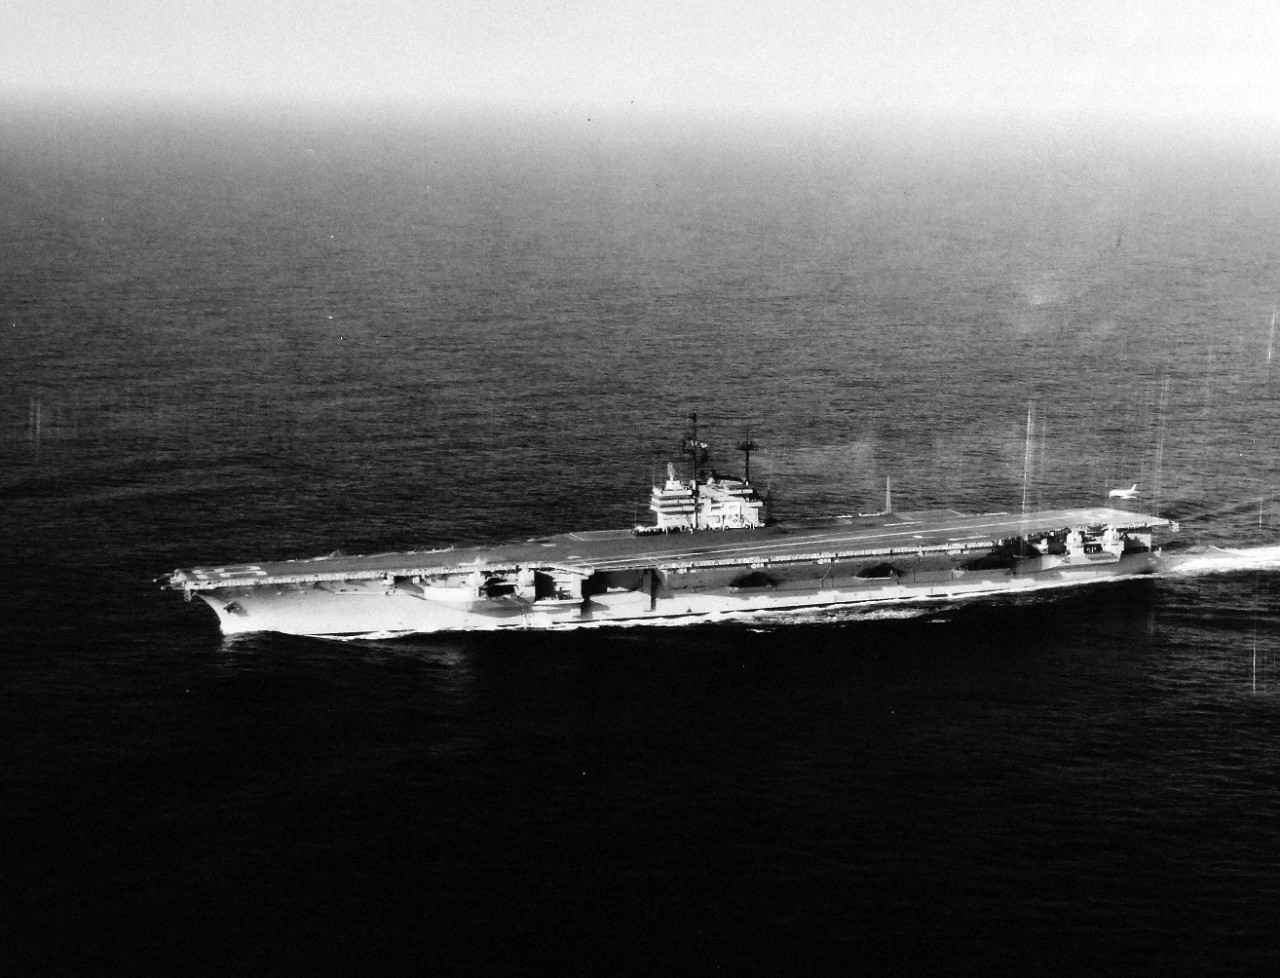 330-PS-7642 (USN 684242):  USS Forrestal (CVA-59), 1956.    First landing is made on USS Forrestal (CVA-59) by Commander R.L. Werner, USN, piloting a U.S. Navy FJ-3 “Fury” jet aircraft.   Werner commanded Air Task Group 181 (ATG-181) and landed approximately 2:40 (EST), January 3, 1956 while the aircraft carrier, operating at sea east of Norfolk, Virginia, was undergoing a series of routine tests.  Commander Werner made three touch-and-go landings before making the first full-stop landing.  A few hours later, piloting the same aircraft, he also made the first catapult launch from the carrier.   Aircraft used for these trials are based at the U.S. Naval Air Station, Oceana, Virginia.  Later, at approximately, 2:45 (EST), Commander W.M. Harnish, USN, Commanding Officer, Squadron 21 (a unit of ATG-181), piloting a U.S. Navy FJ-3 “Fury” made the second landing on board Forrestal.    Commander Harnish’s father, Mr. W.E. Harnish, was the Professor of Education at the University of Illinois.  Lieutenant Vincent Darcey, USN, of ATG-181, was the Landing Signal Officer for both landings.  Both aircraft were painted with the new white and grey “atomic” paint scheme.    Photograph released January 4, 1956.   Offical U.S. Navy Photograph, now in the collections of the National Archives.  (2015/02/18)  